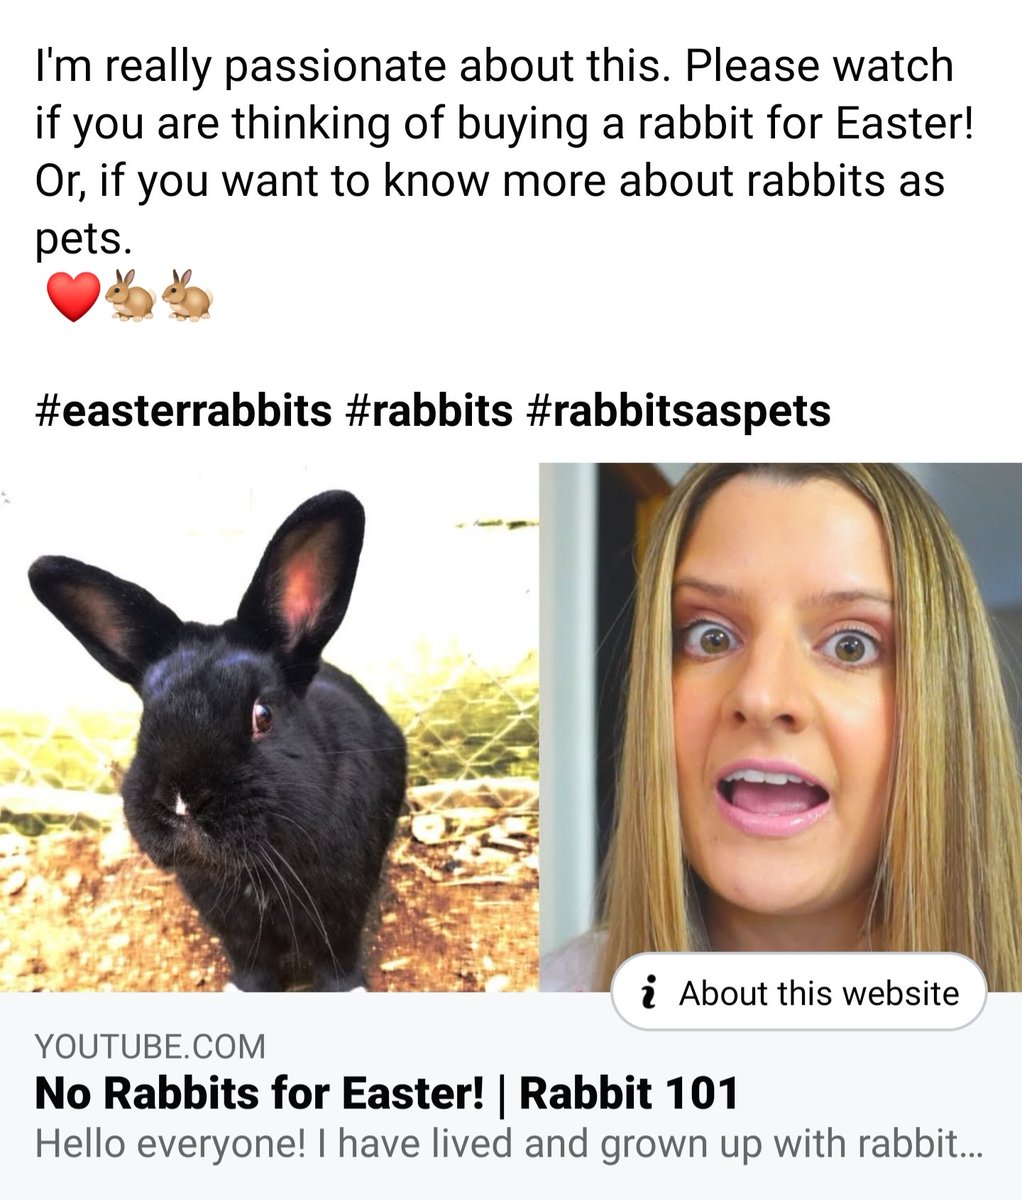 Find me on YouTube as 'Morgan Talks'! I'm very passionate about this issue. @peta

#easterbunny #rabbits #YouTube  #youtubechannel #rabbitcommunity